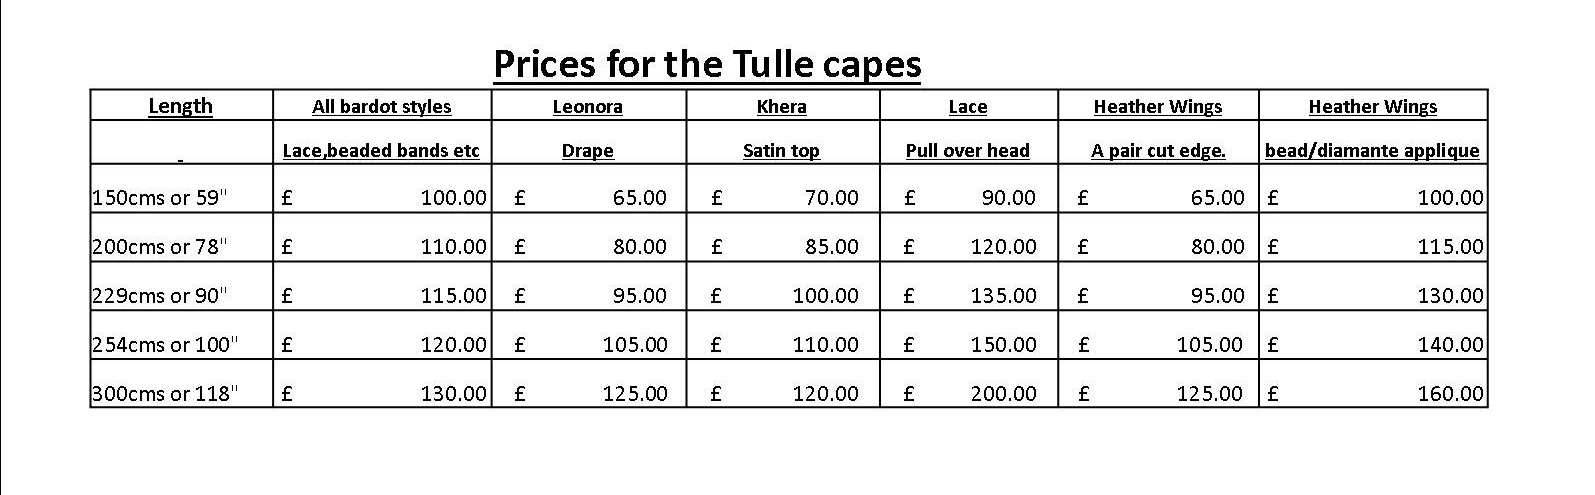 prices grid for capes